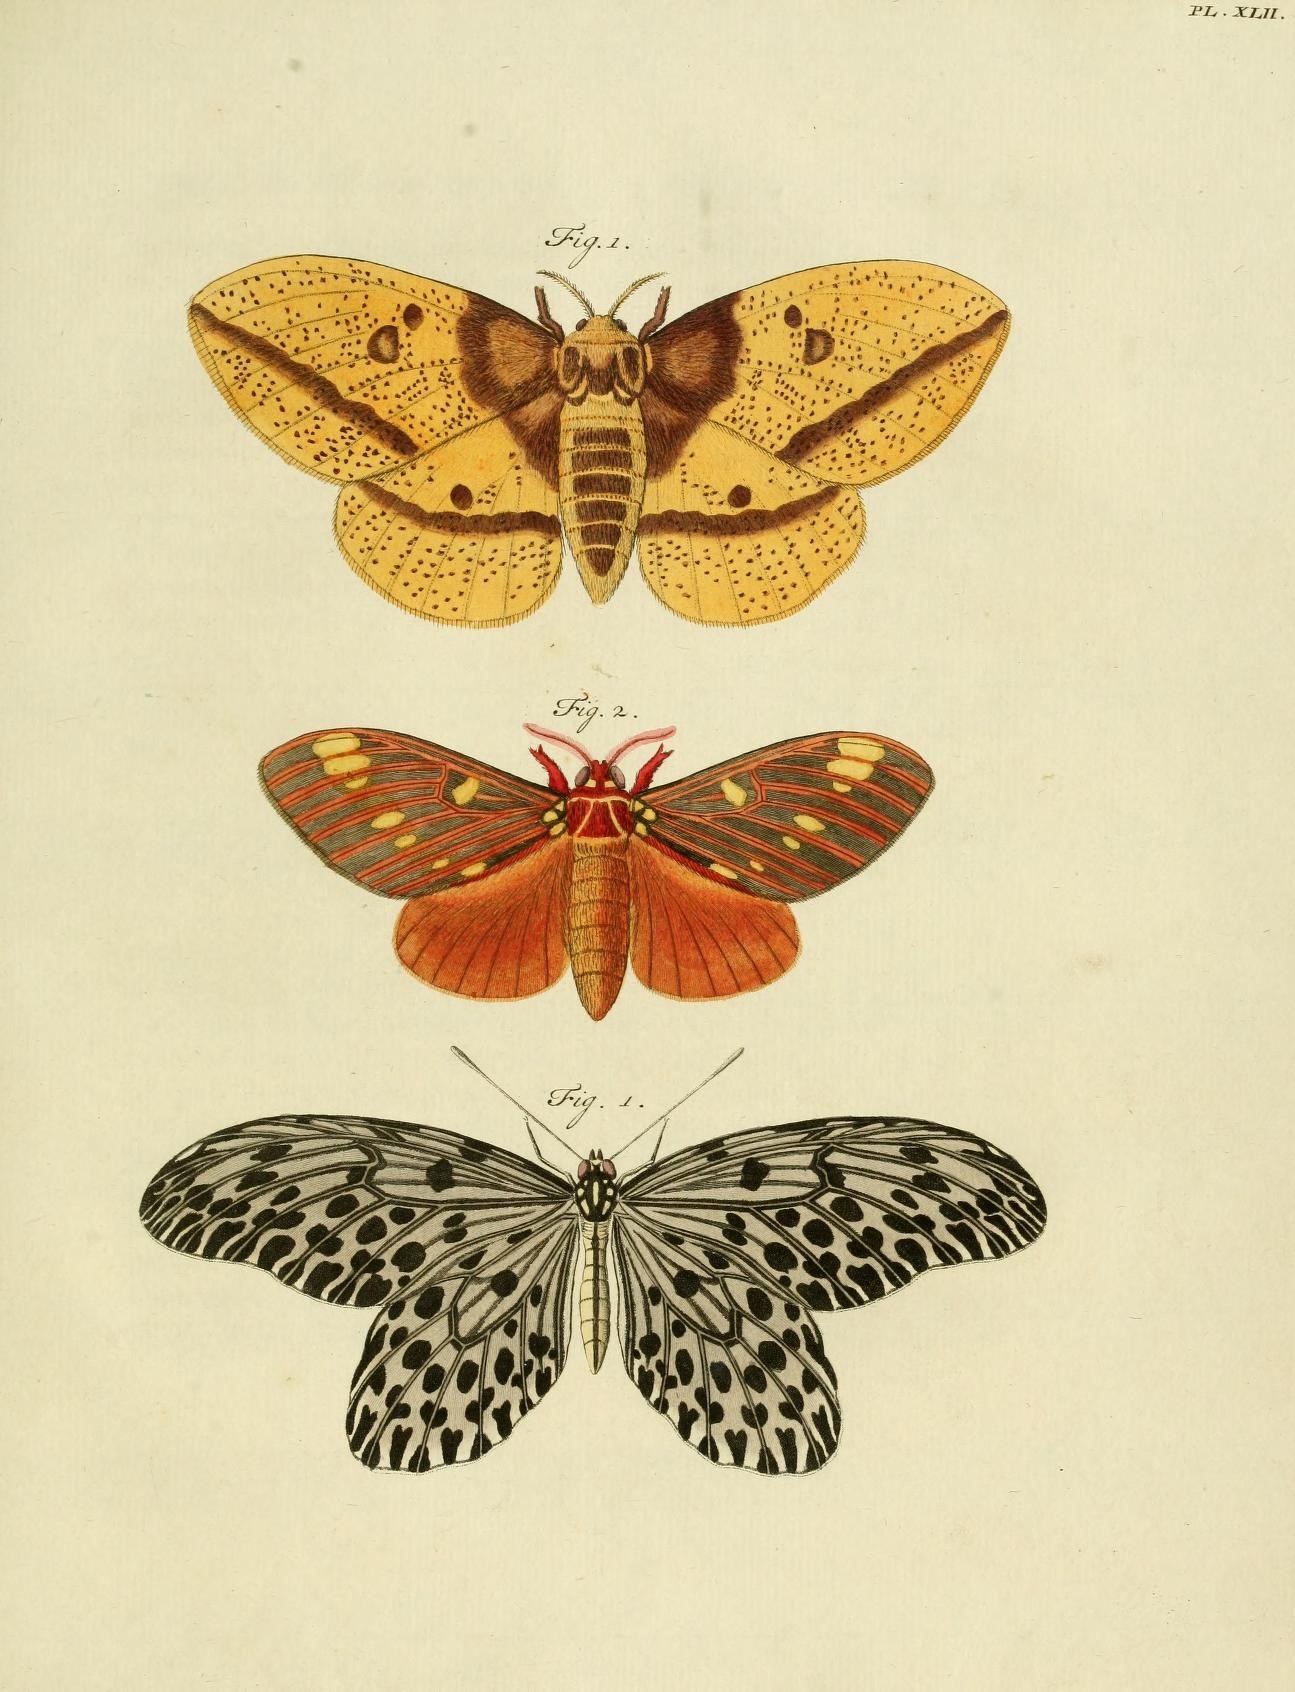 the moths in three different stages of flight